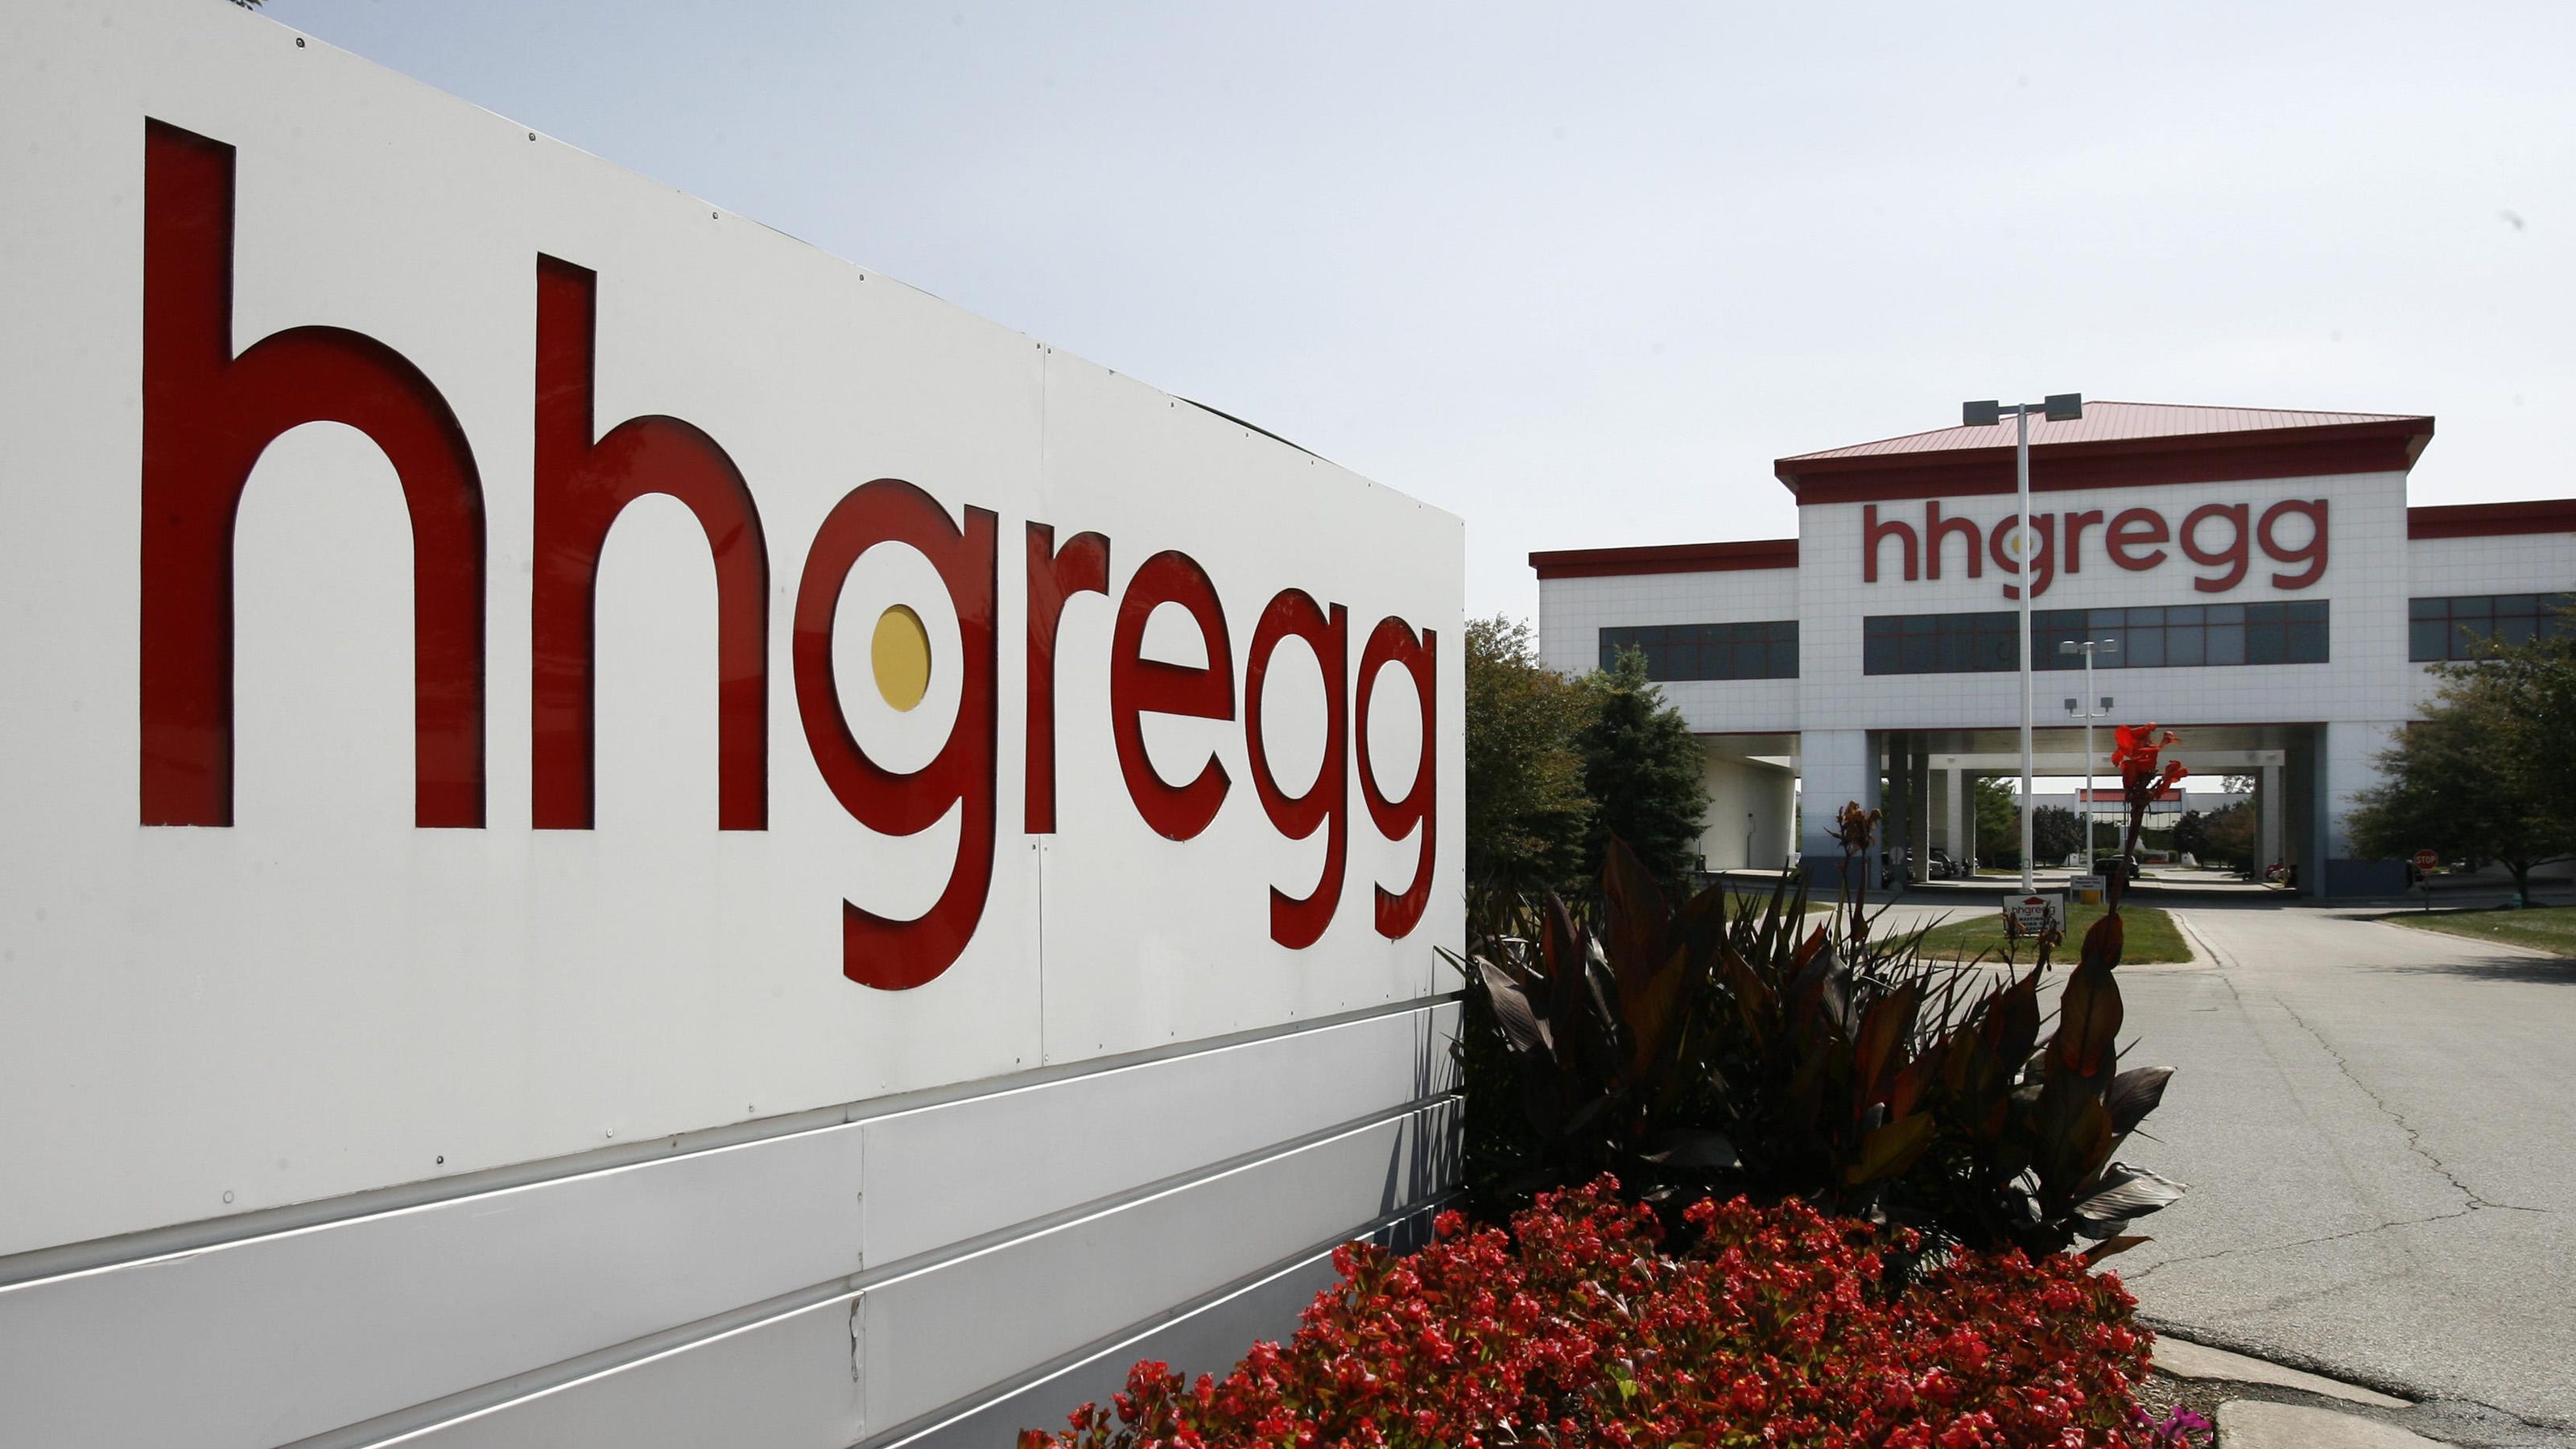 hhgregg-to-close-all-stores-after-failing-to-find-a-buyer